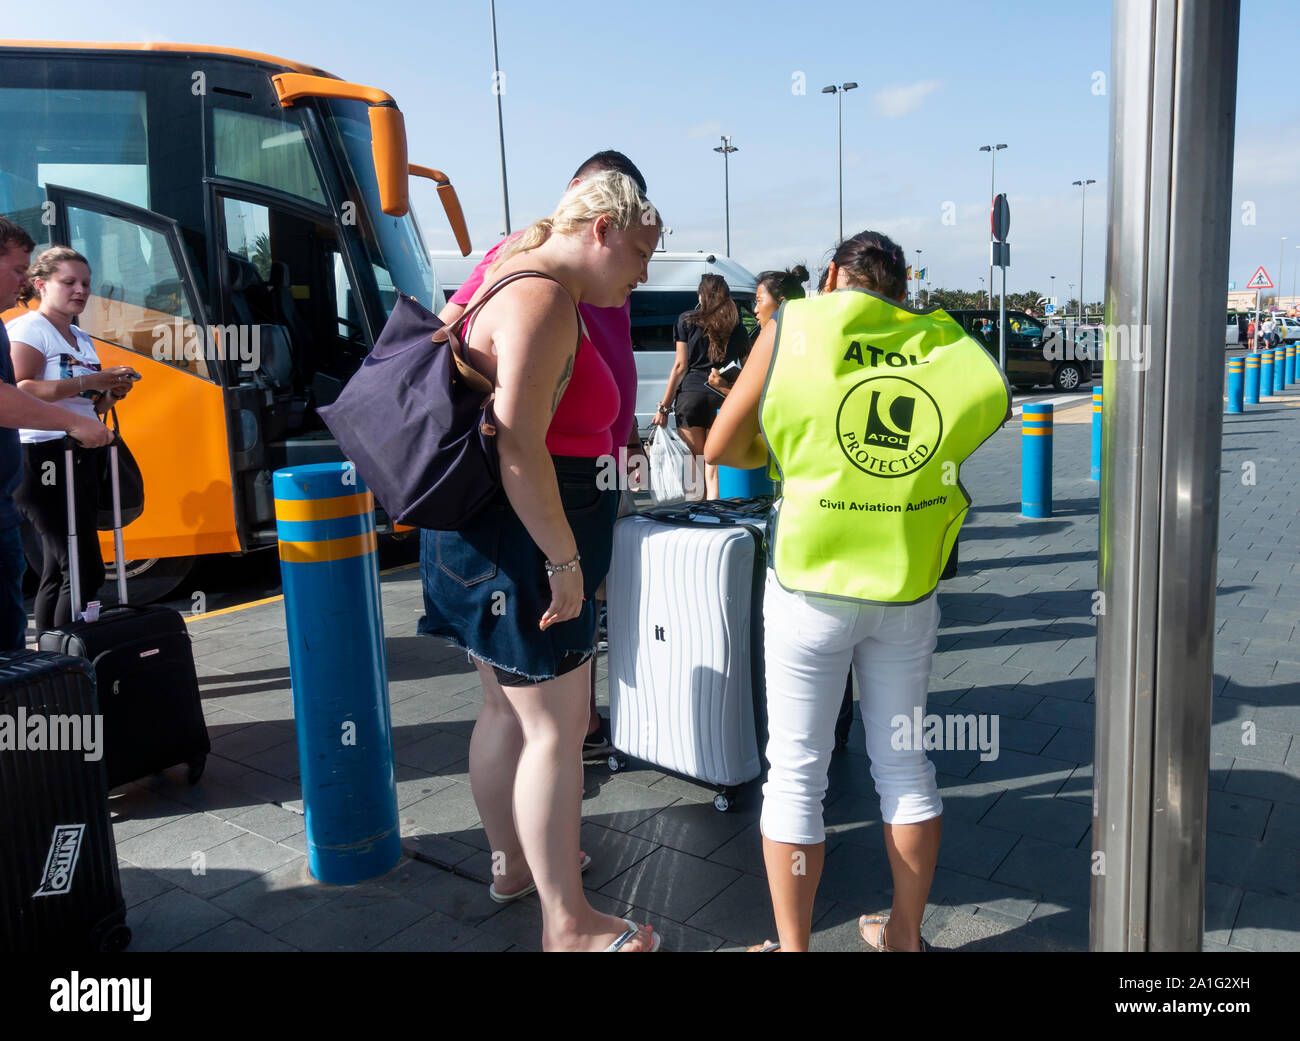 Gran Canaria, Canary Islands, Spain. 26th September, 2019. Thomas Cook customers arrive at Gran Canaria airport, where four repatriation flights to the UK are scheduled for Thursday night (26th September). Atol staff and British Government officials where at the airport to assist passengers.  Repatriation flights from The Canary Islands will continue into October. Credit: Alan Dawson News/Alamy Live News Stock Photo